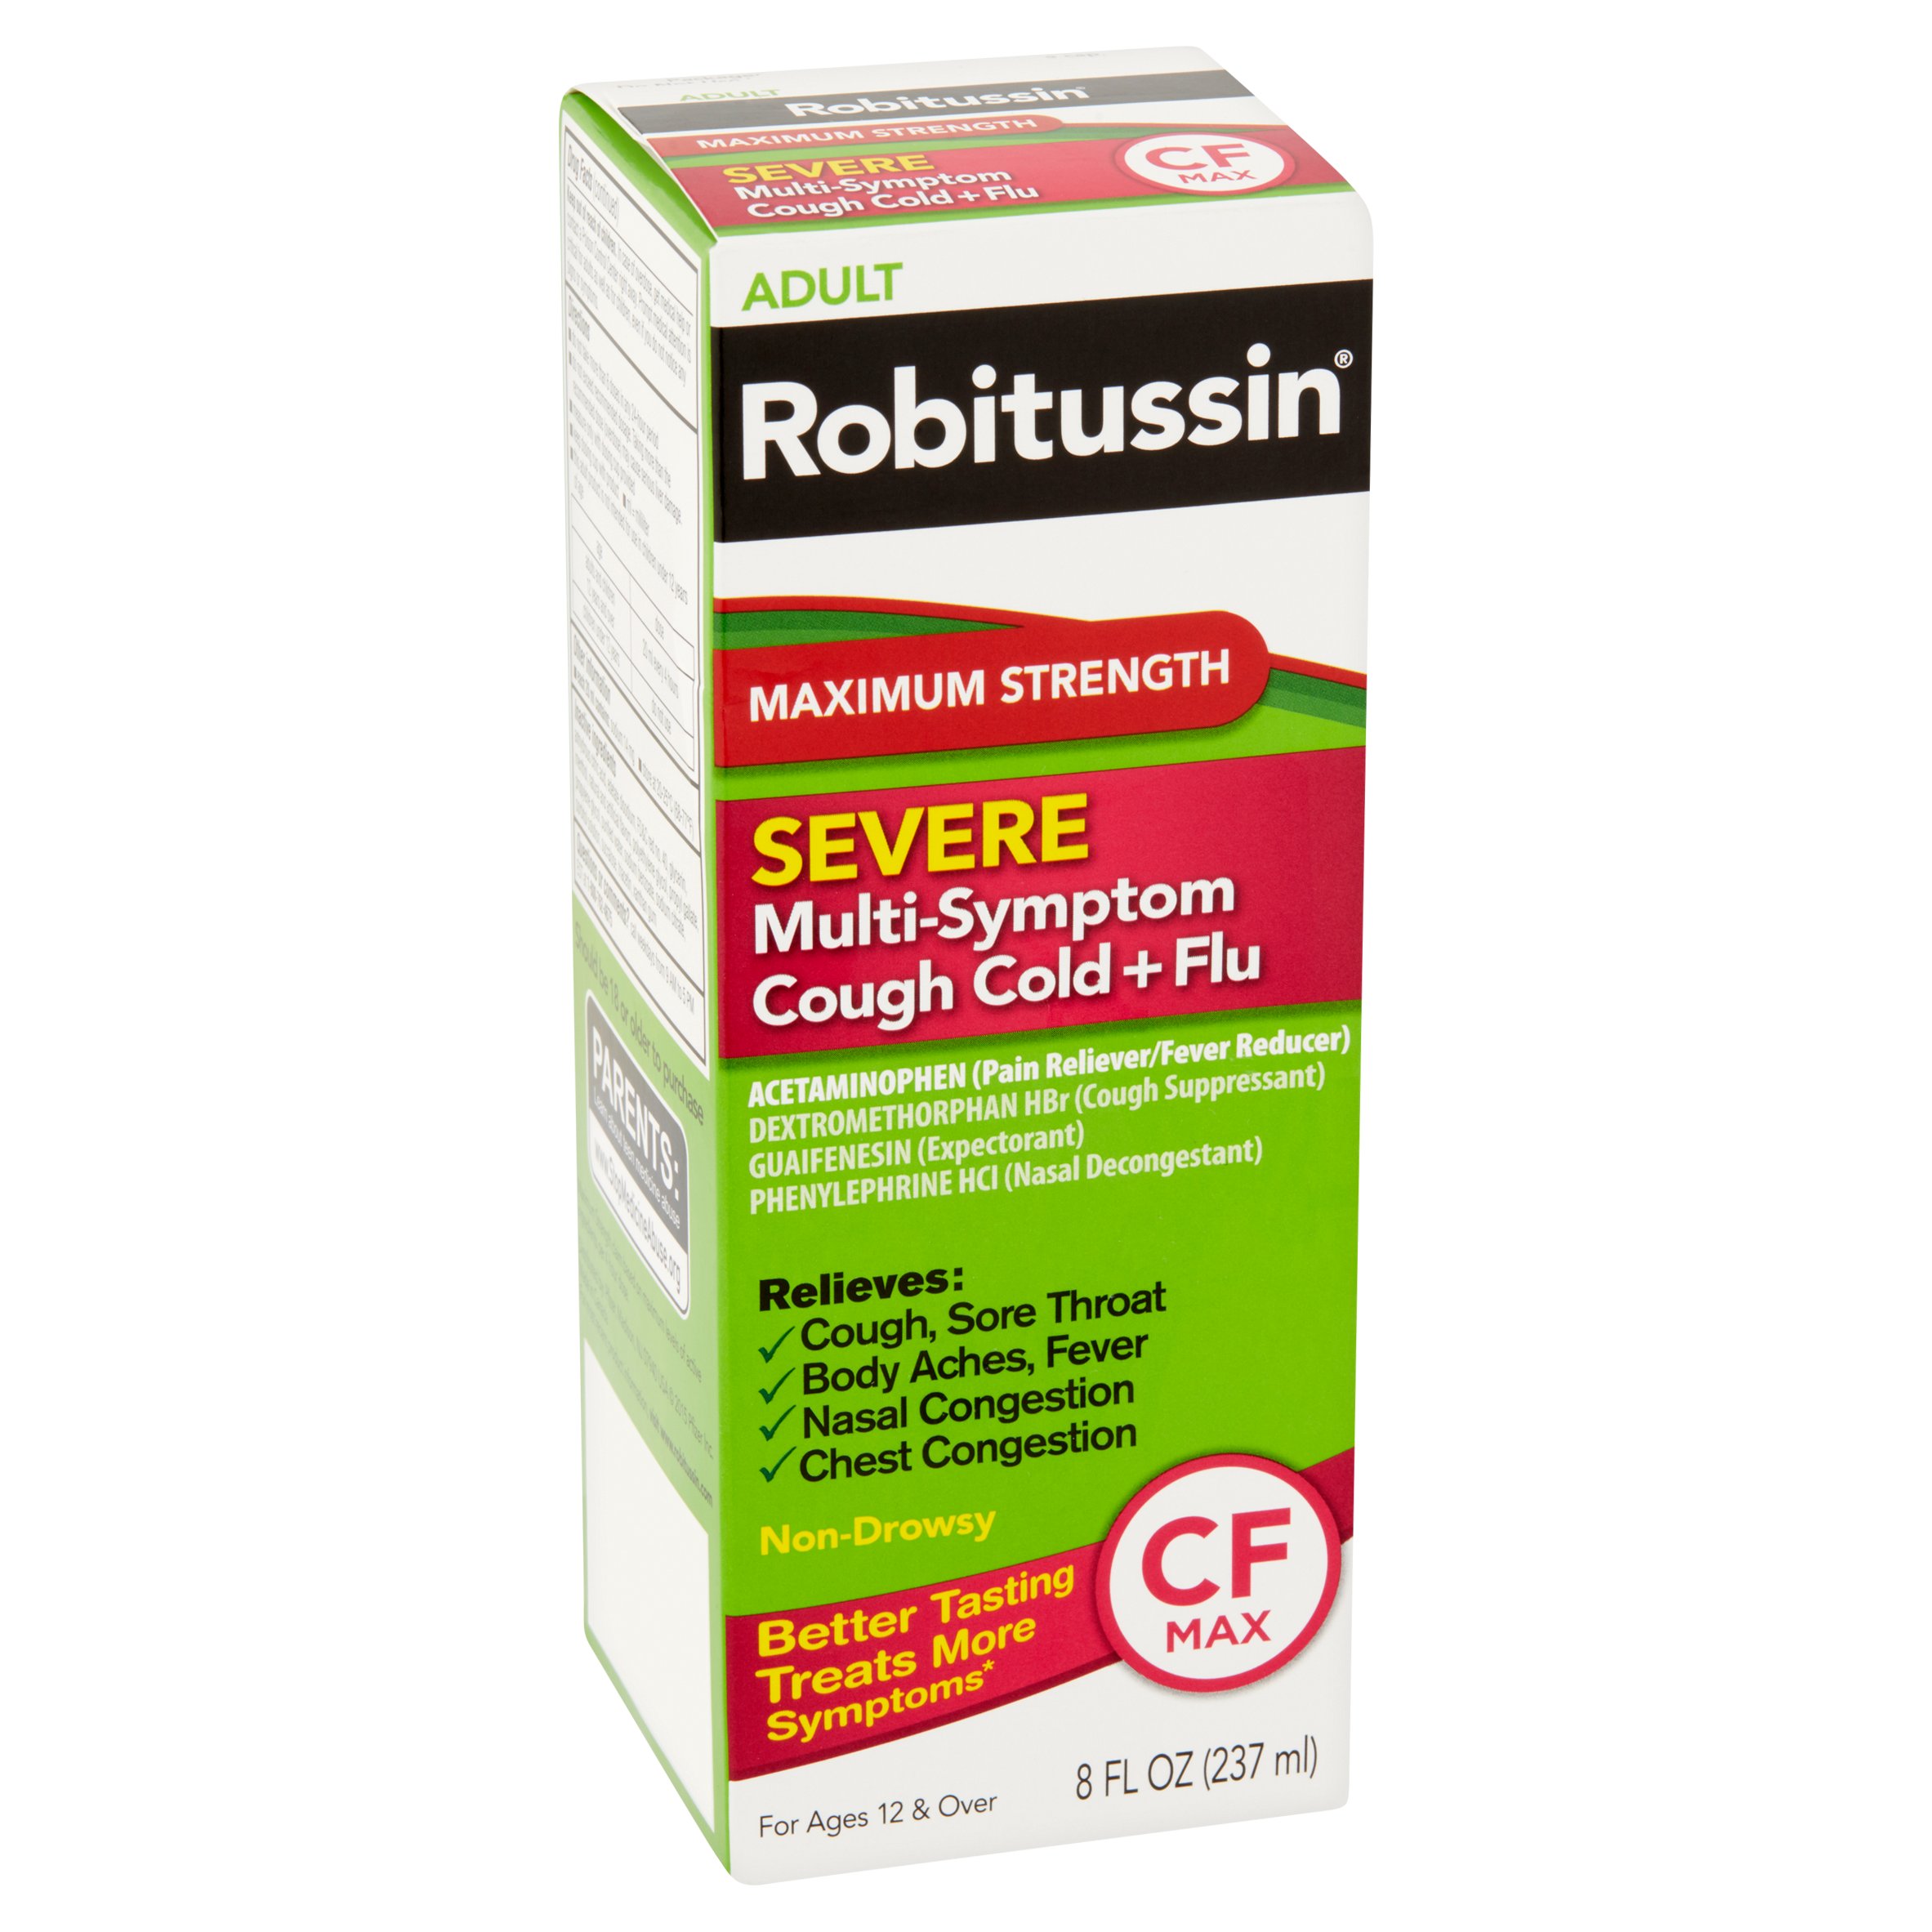 Robitussin Adult Max Strength Severe Cough Cold and Flu Medicine, 8 Fl Oz - image 2 of 5